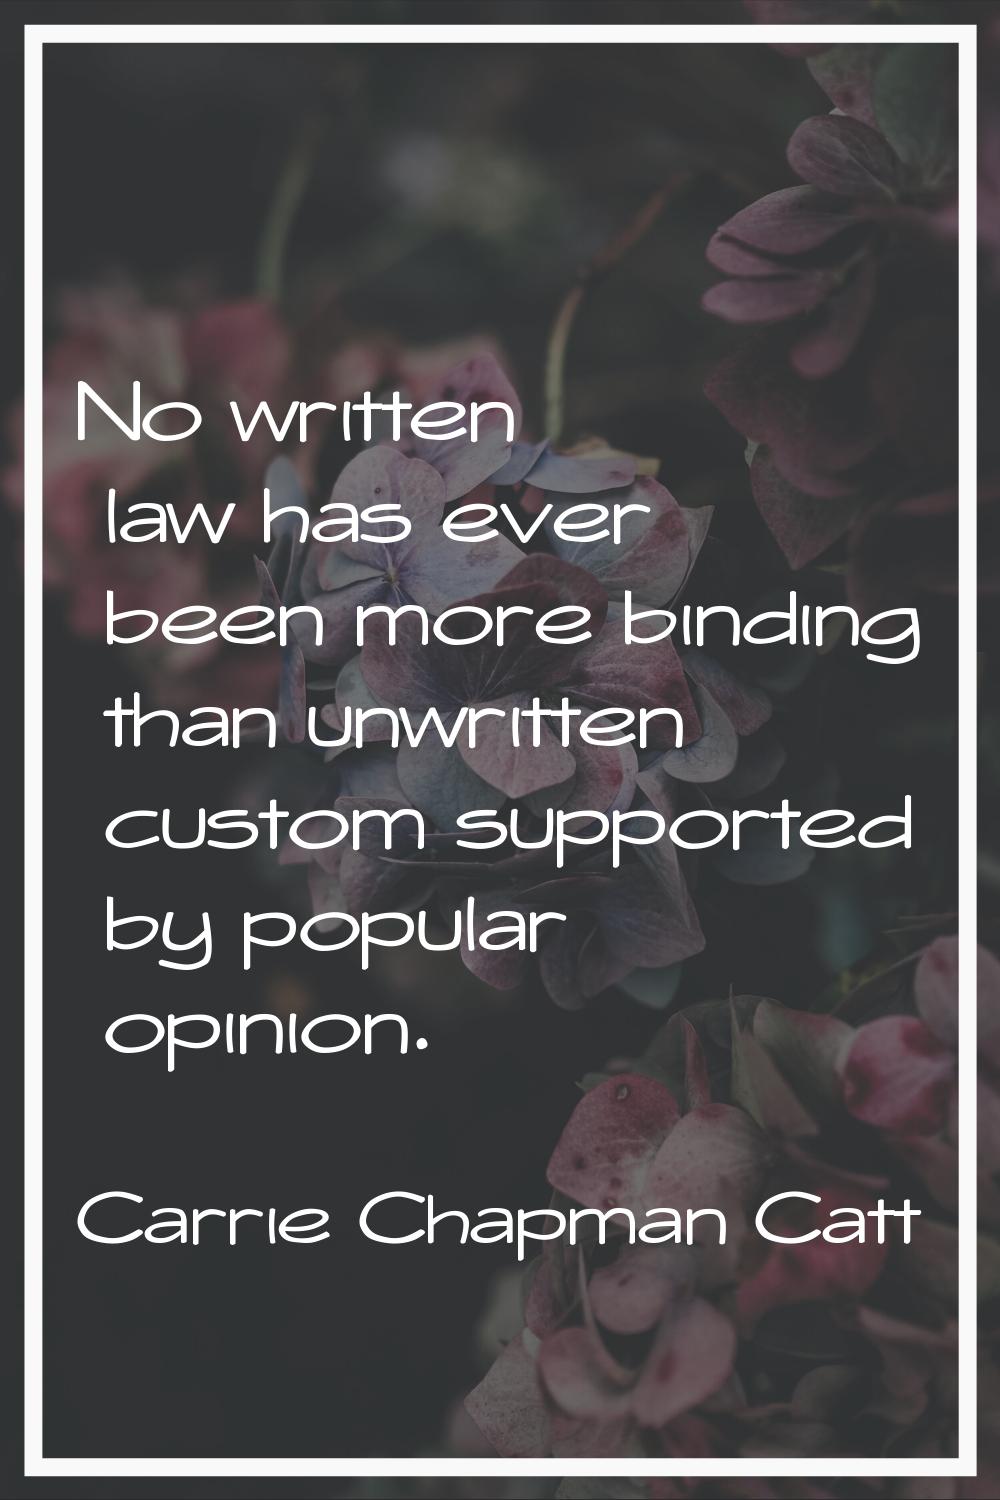 No written law has ever been more binding than unwritten custom supported by popular opinion.